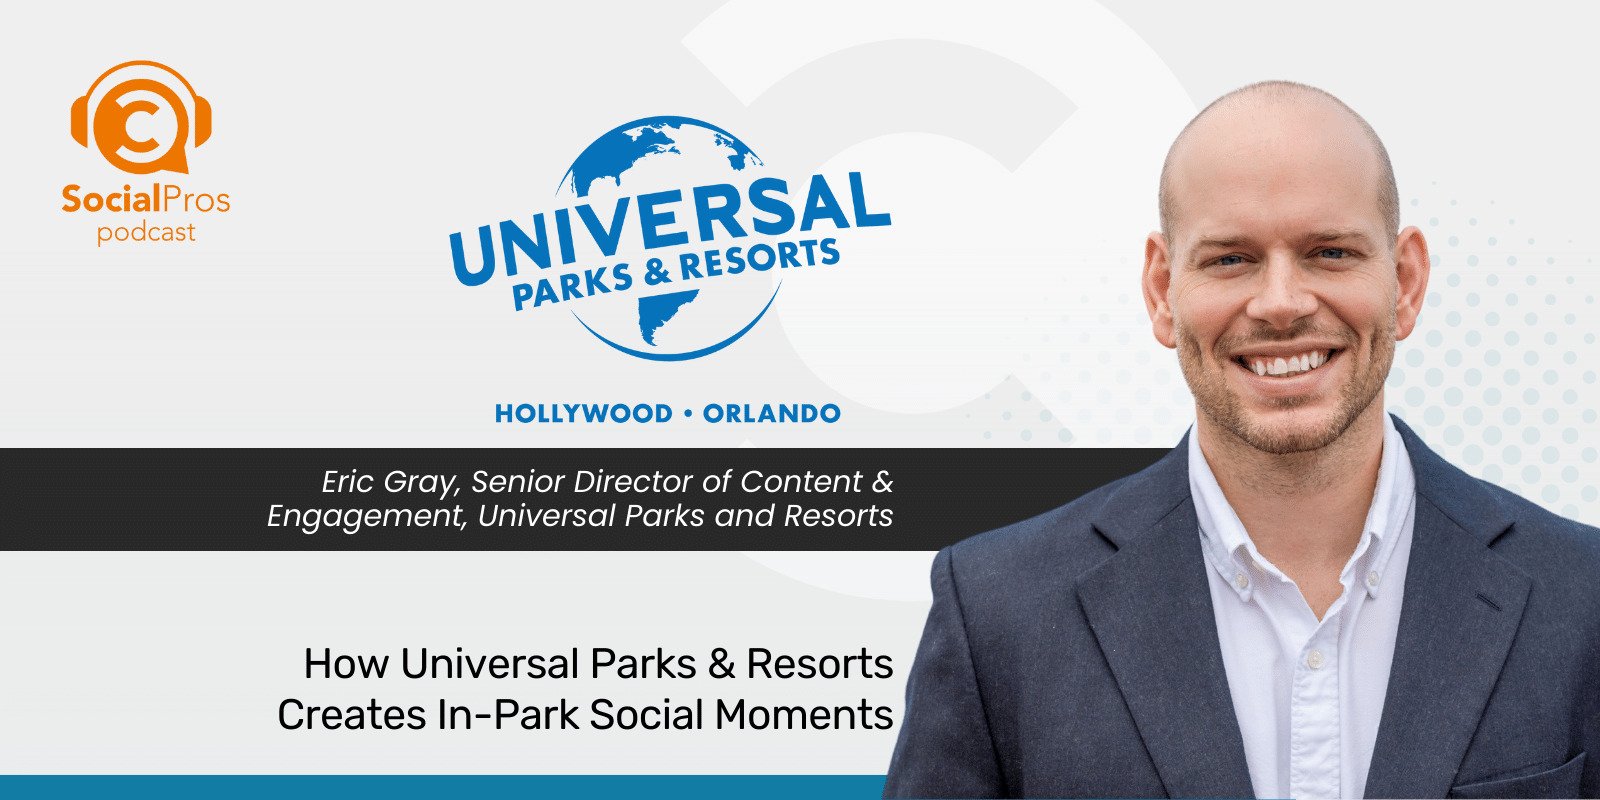 How Universal Parks & Resorts Creates In-Park Social Moments